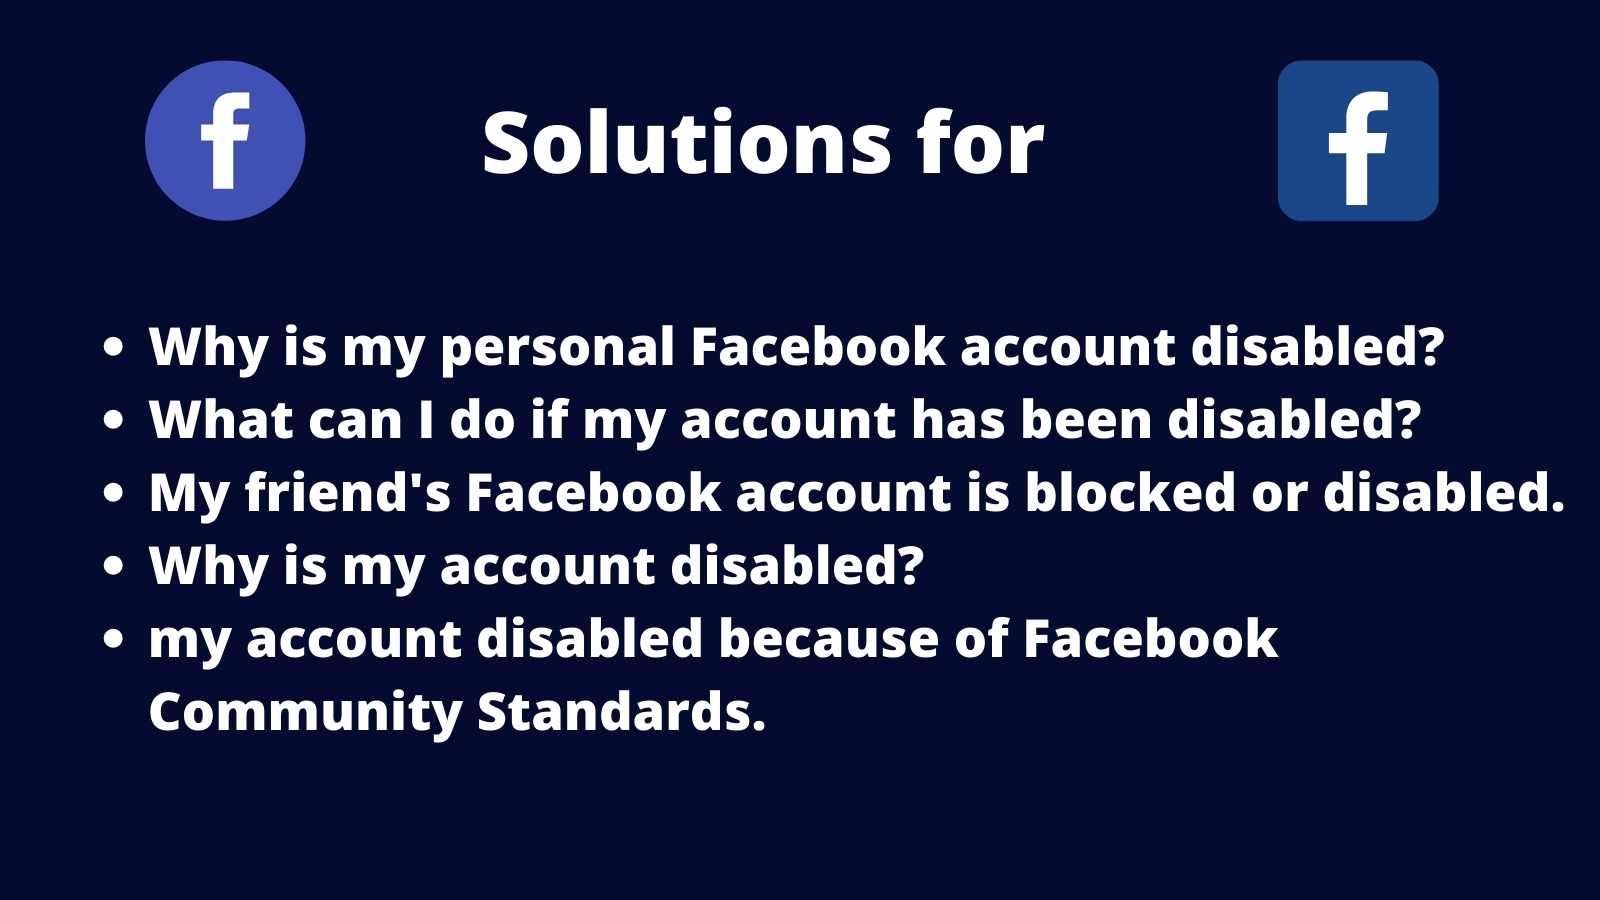 how to solve my account disabled because of Facebook Community Standards